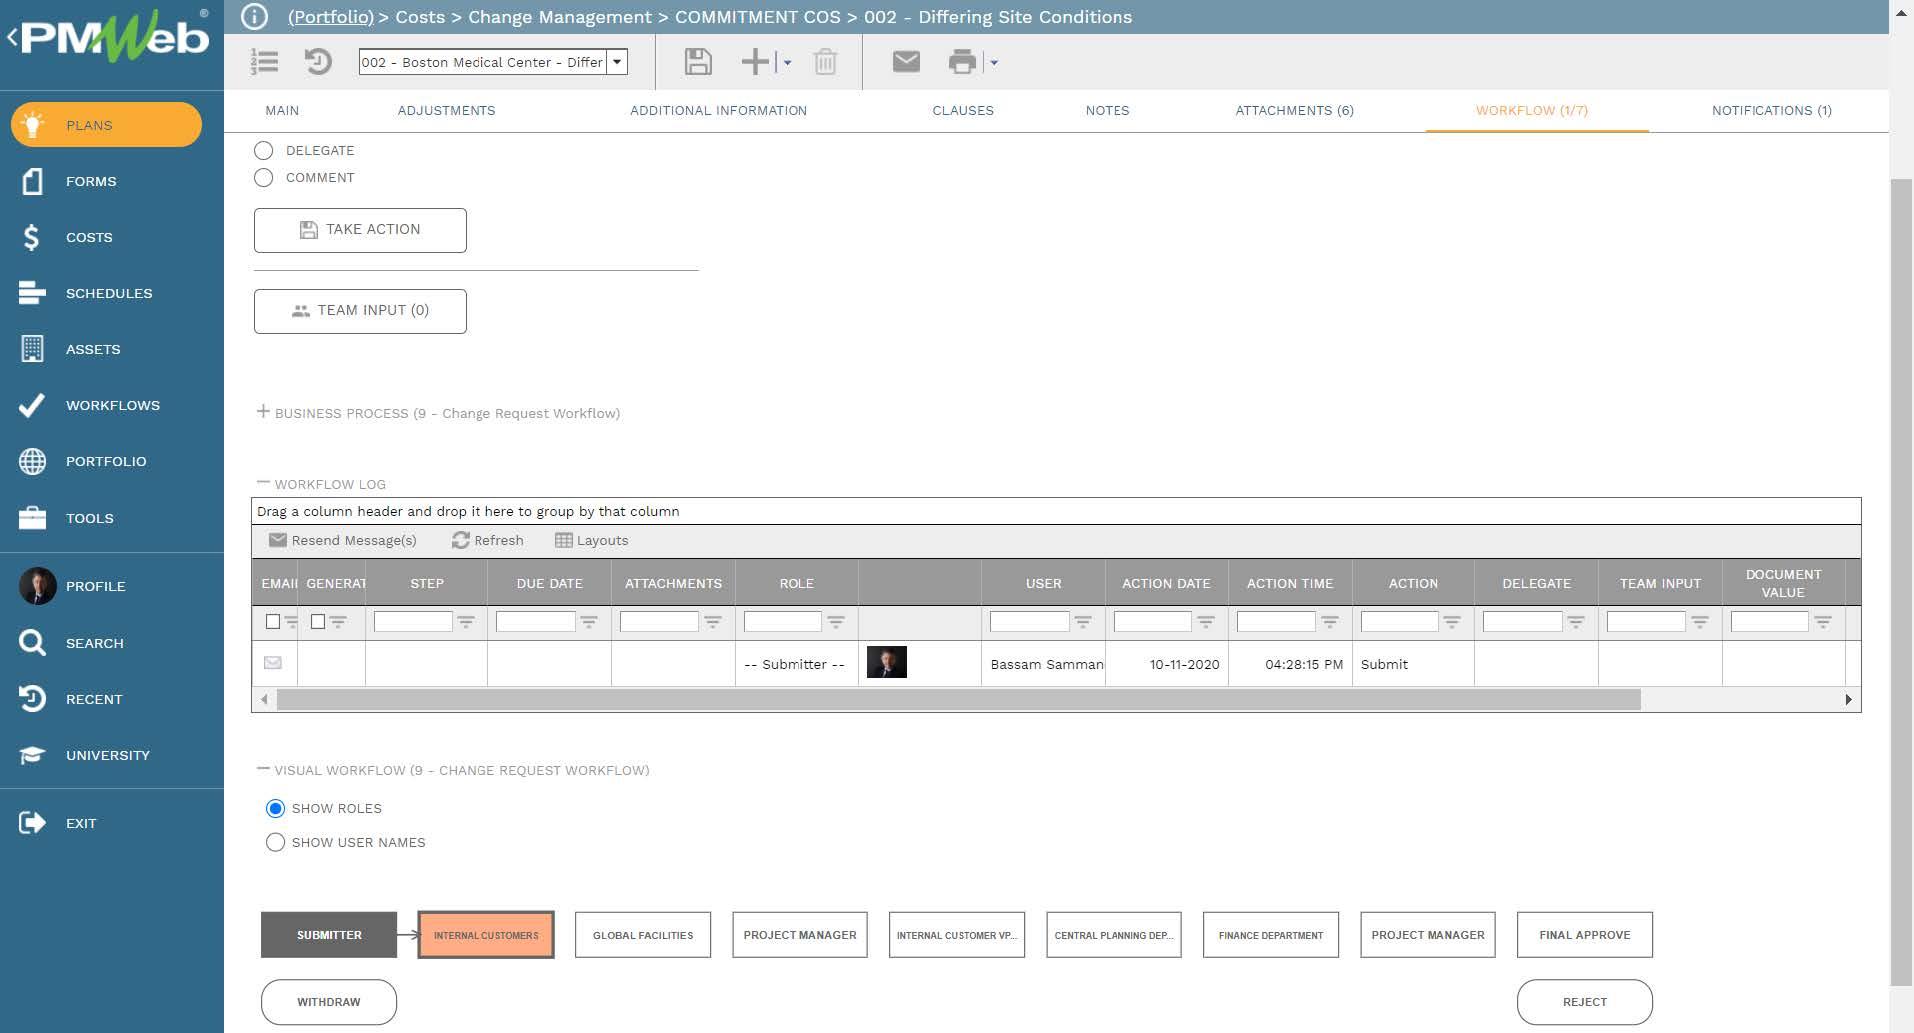 PMWeb 7 Costs Change Management Commitment COS Differing Site Conditions 
Workflow 